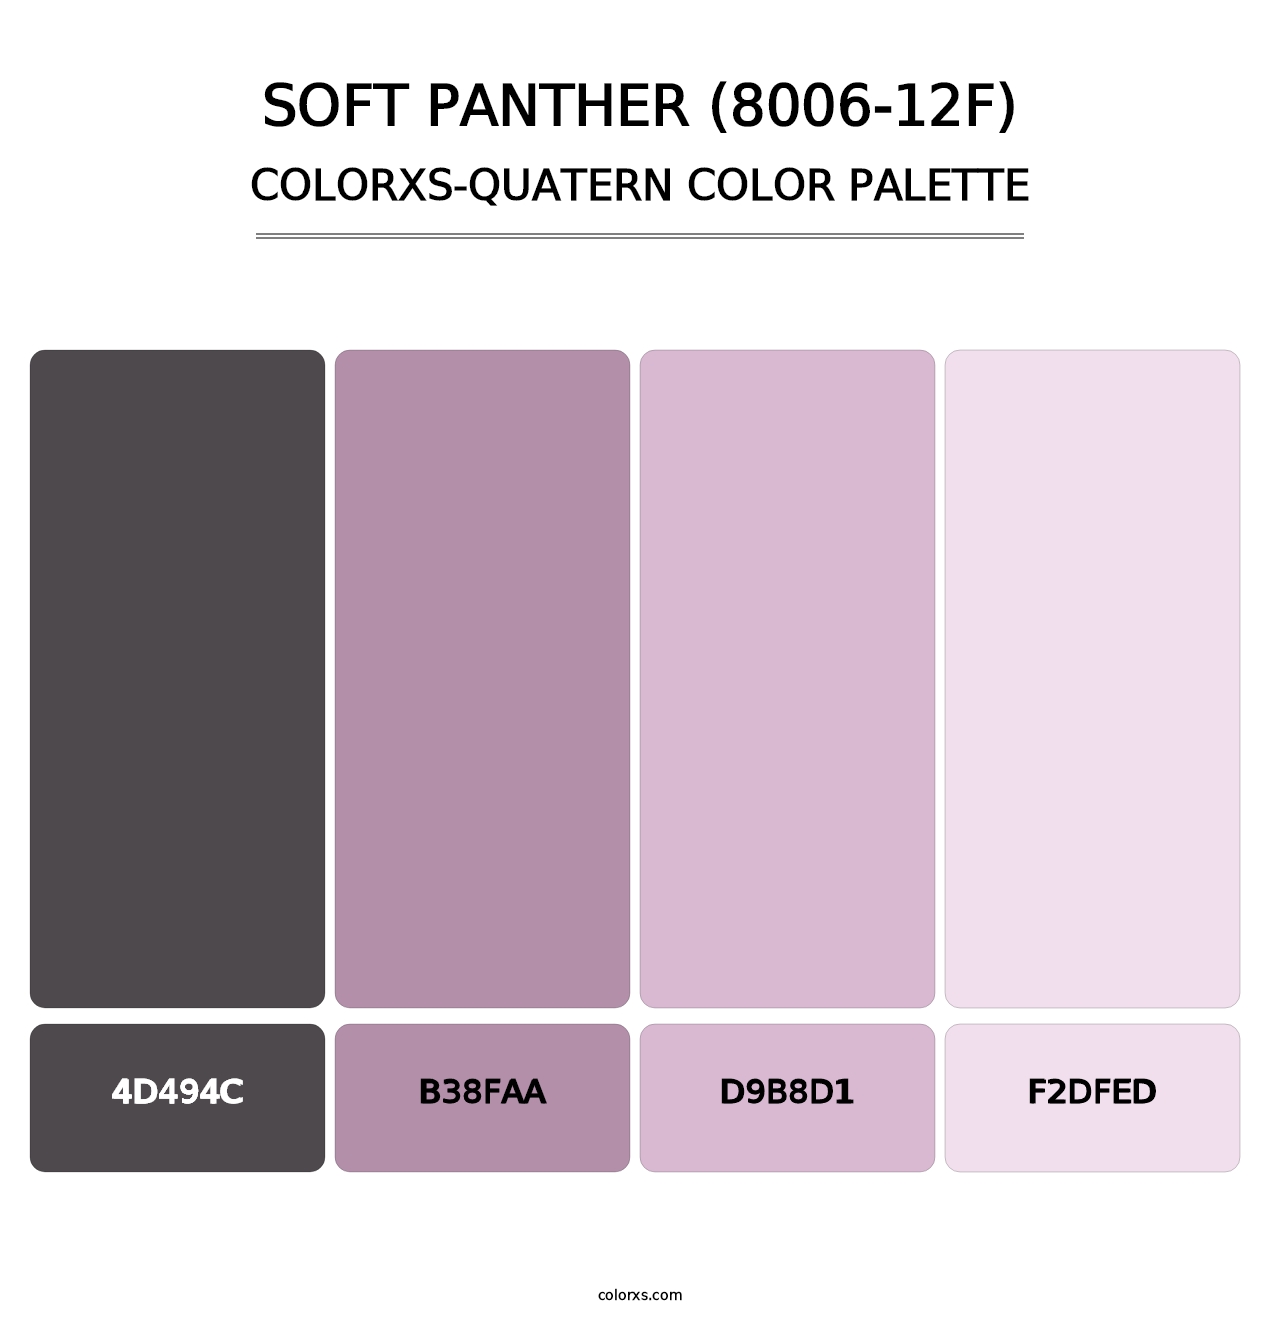 Soft Panther (8006-12F) - Colorxs Quatern Palette